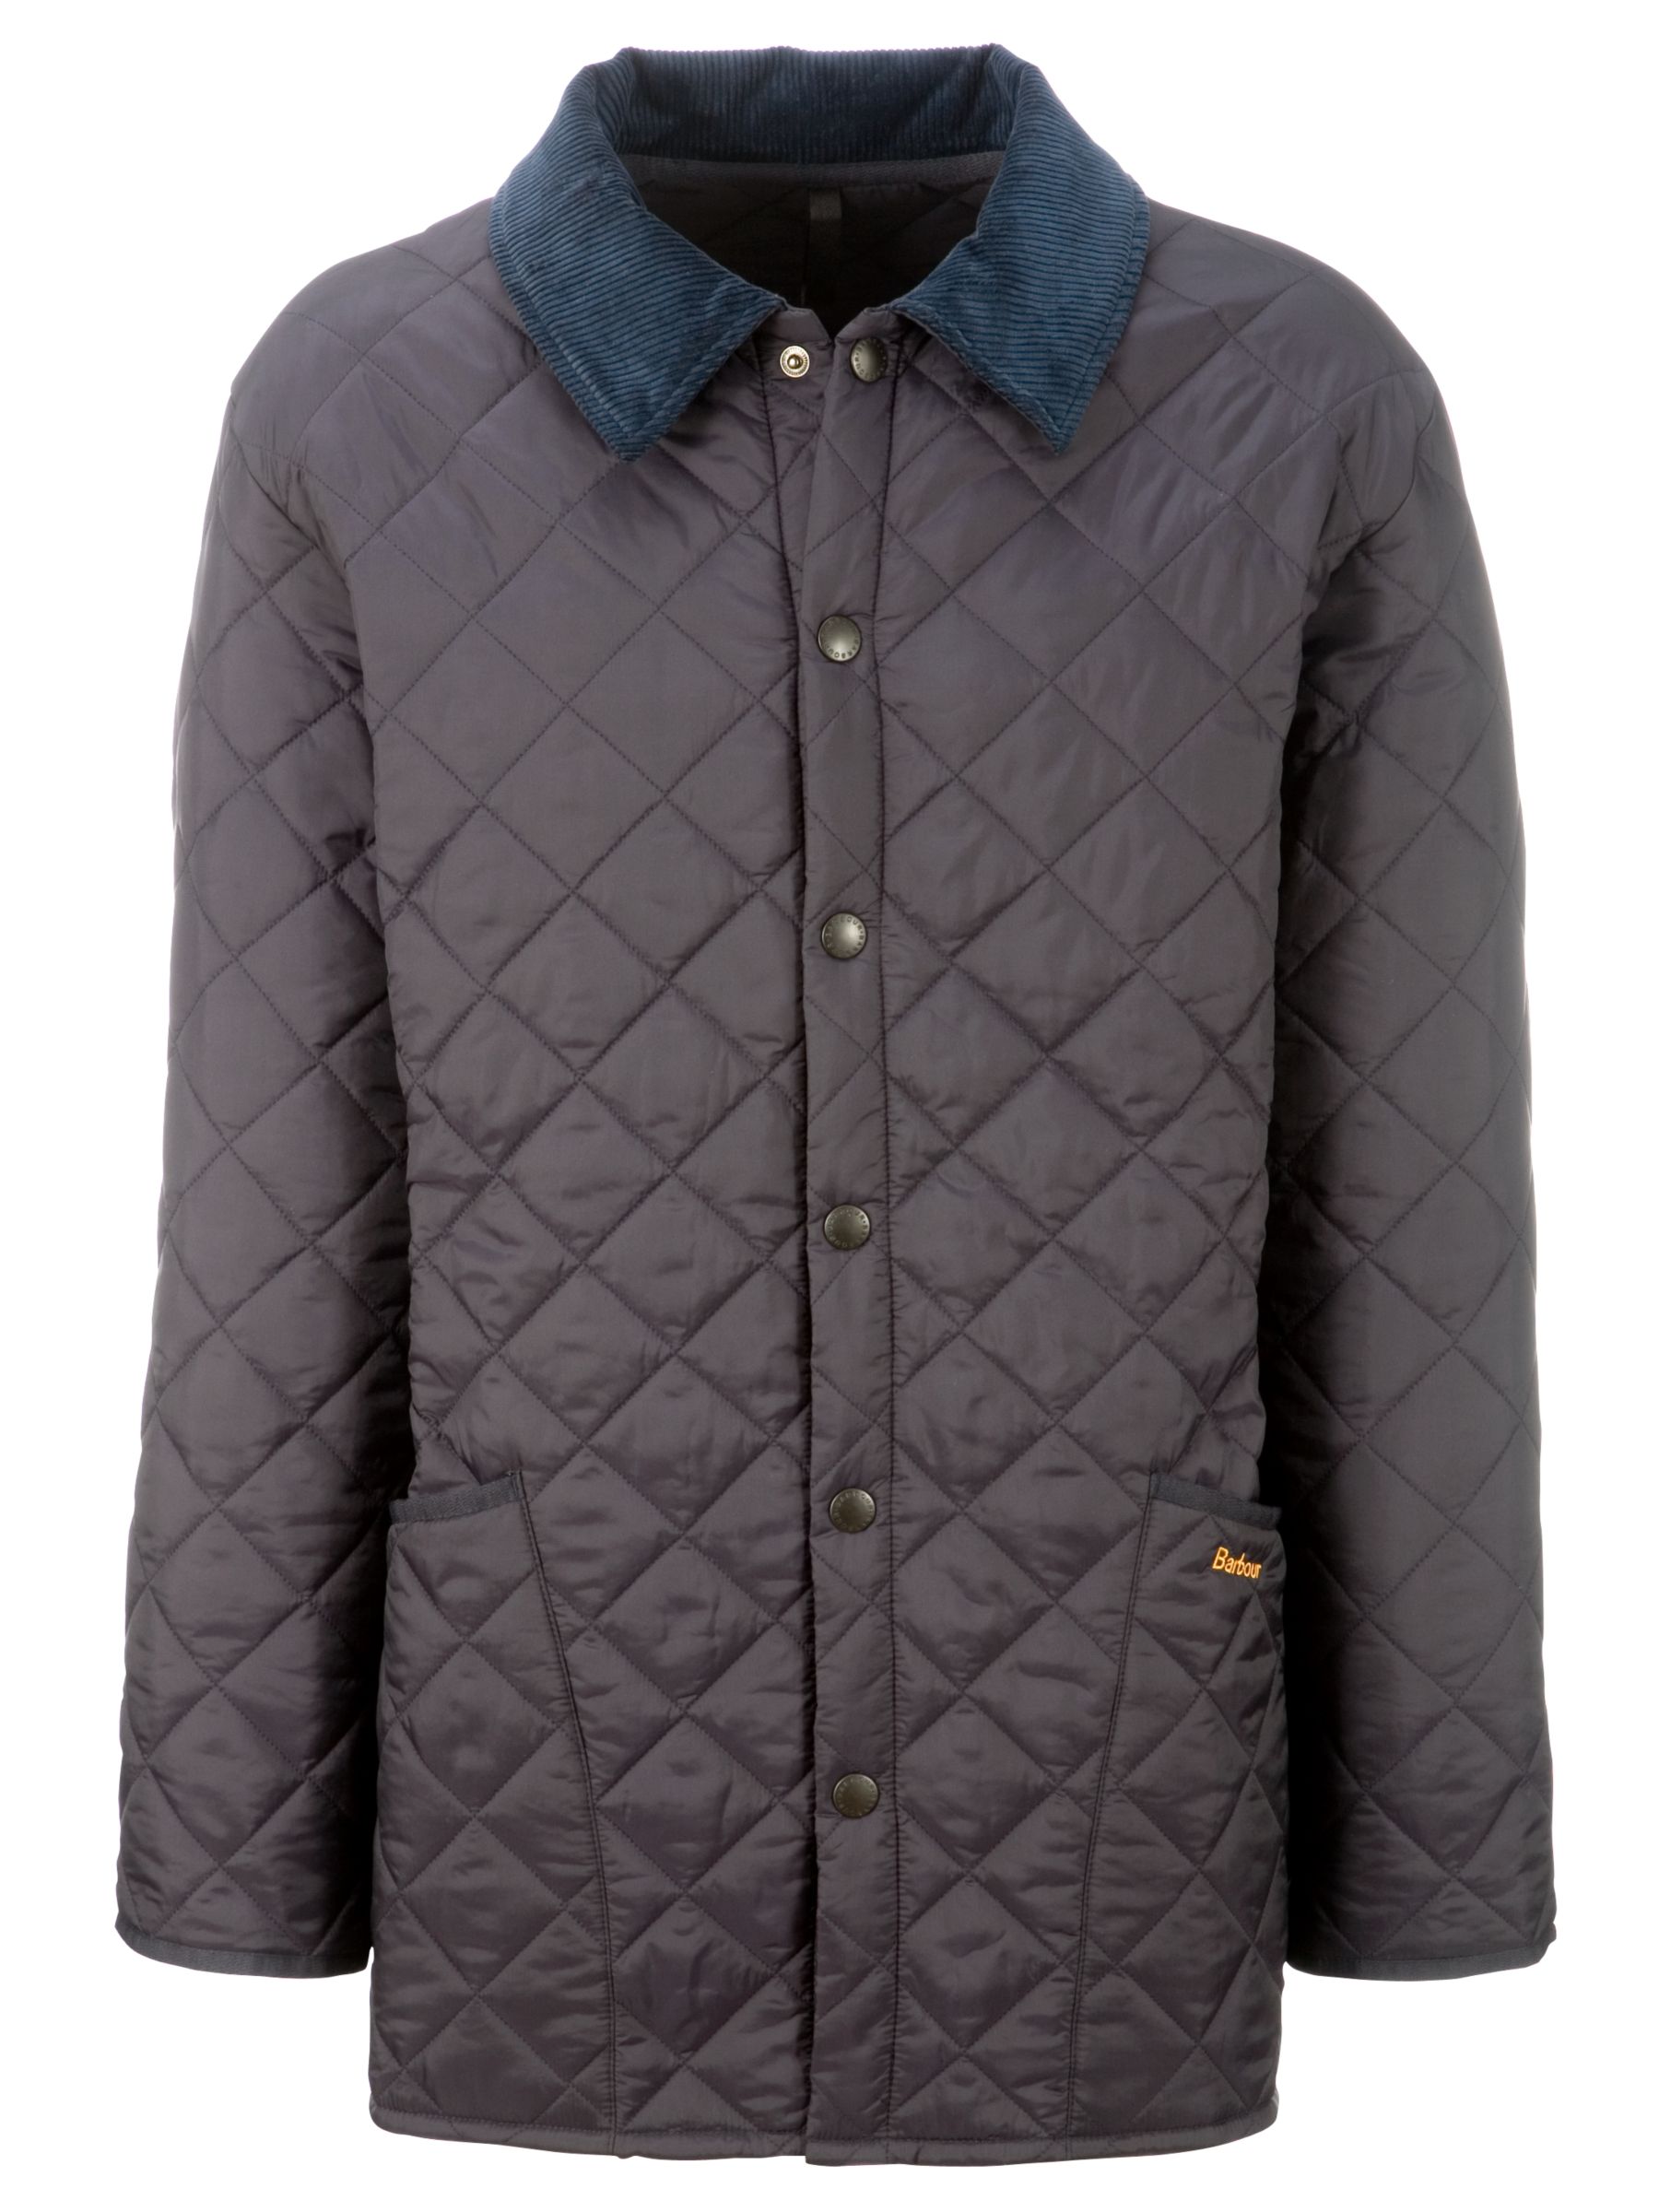 Barbour Liddesdale Quilted Jacket, Navy at John Lewis & Partners